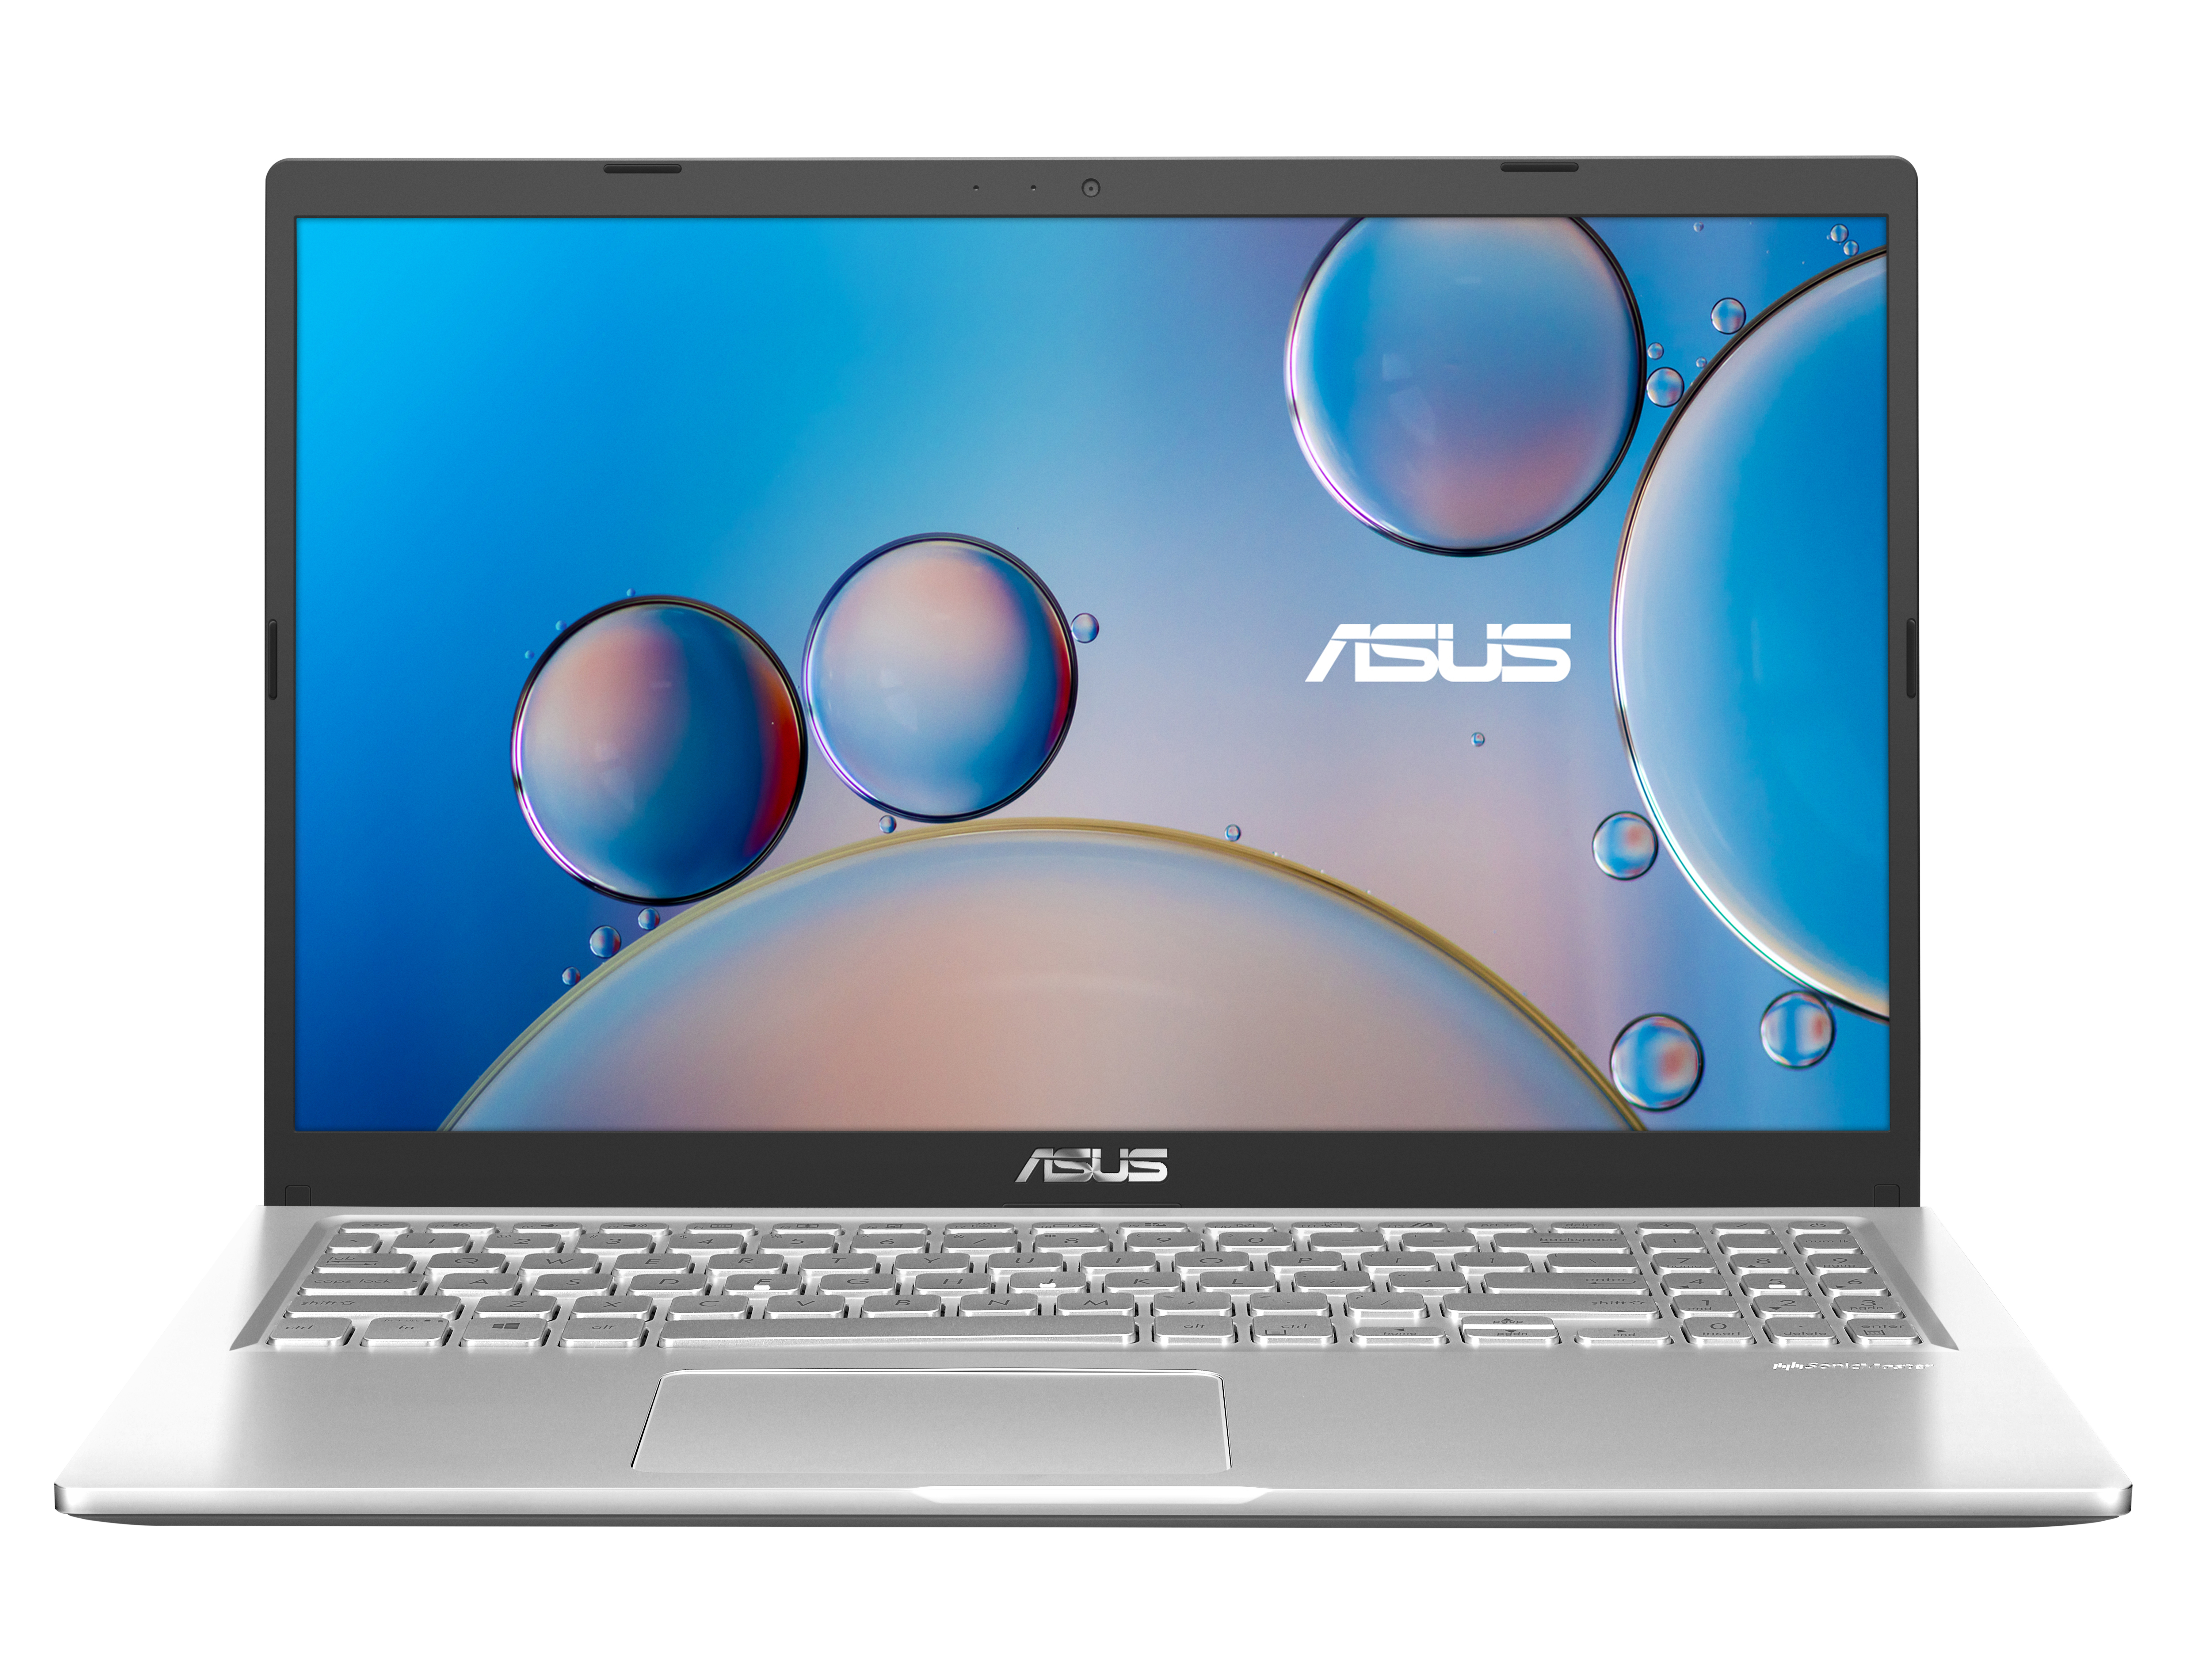 NOTEBOOK ASUS I3-1005G1 /8G /256SSD /HDGRAPH /15.6HD /WIN10HOME